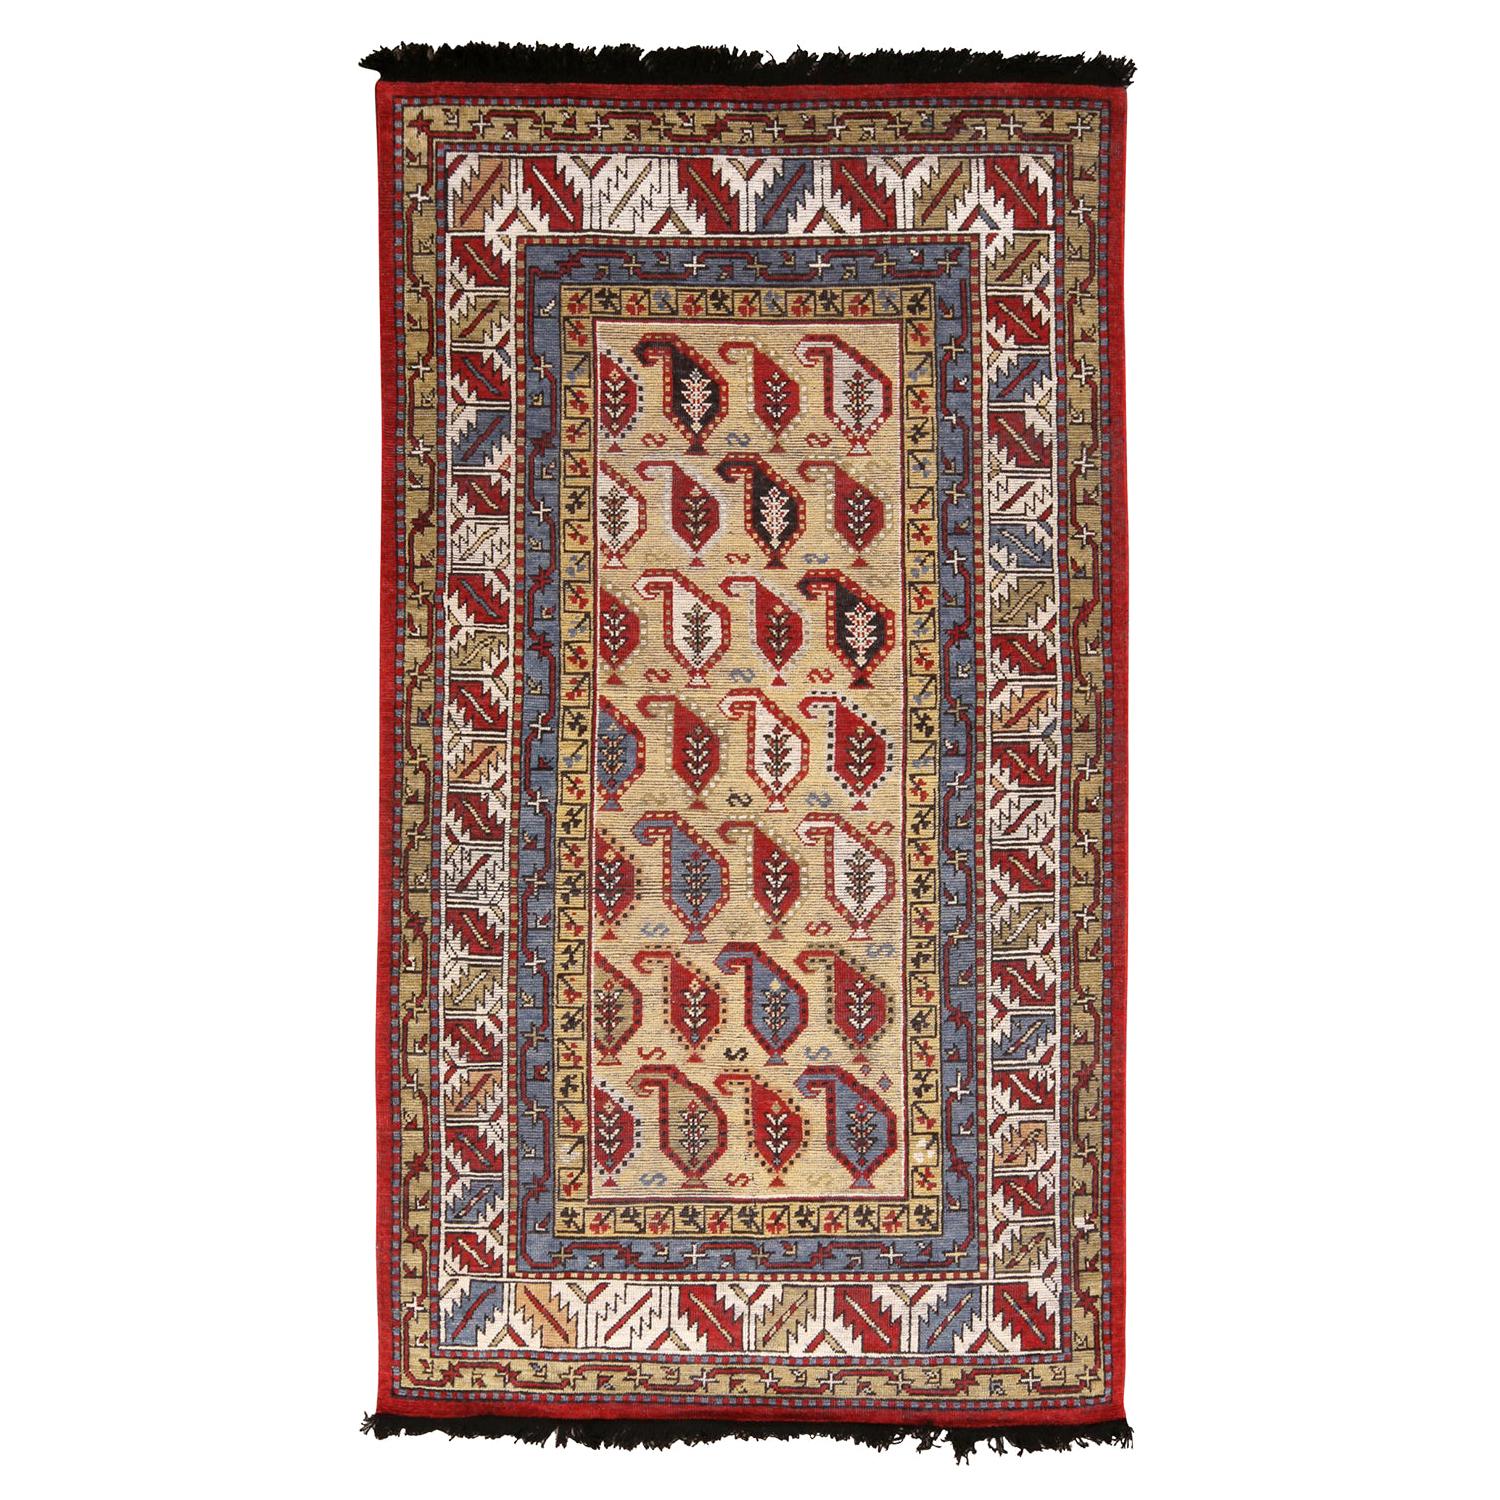 Rug & Kilim's Burano Beige Gold and Red Wool Rug with Boteh Patterns and Blue  For Sale